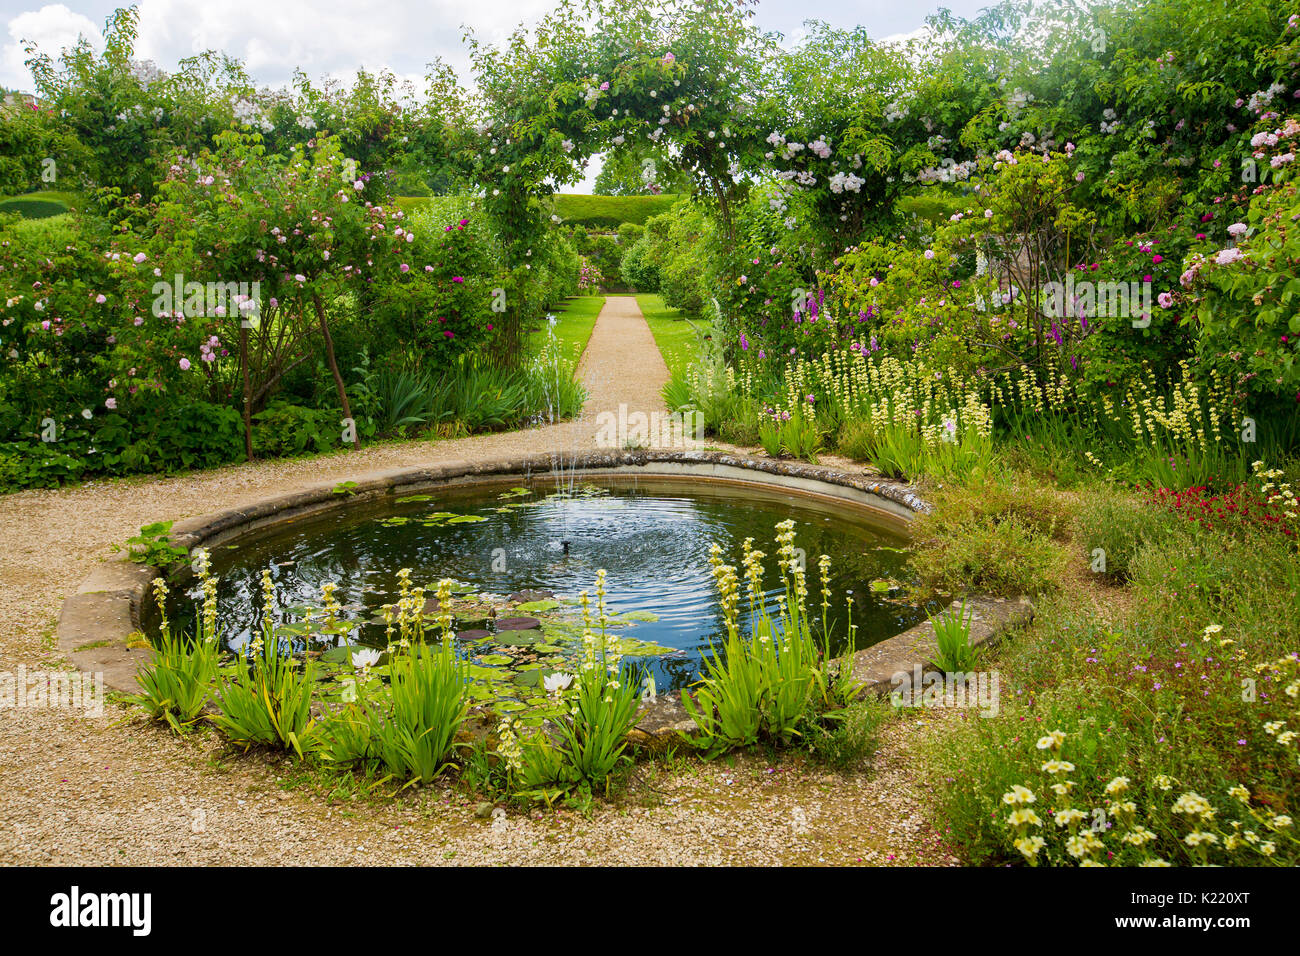 Extensive & stunning English garden with circular pond, herbaceous borders, and pathway leading through archway with climbing roses at Rousham gardens Stock Photo